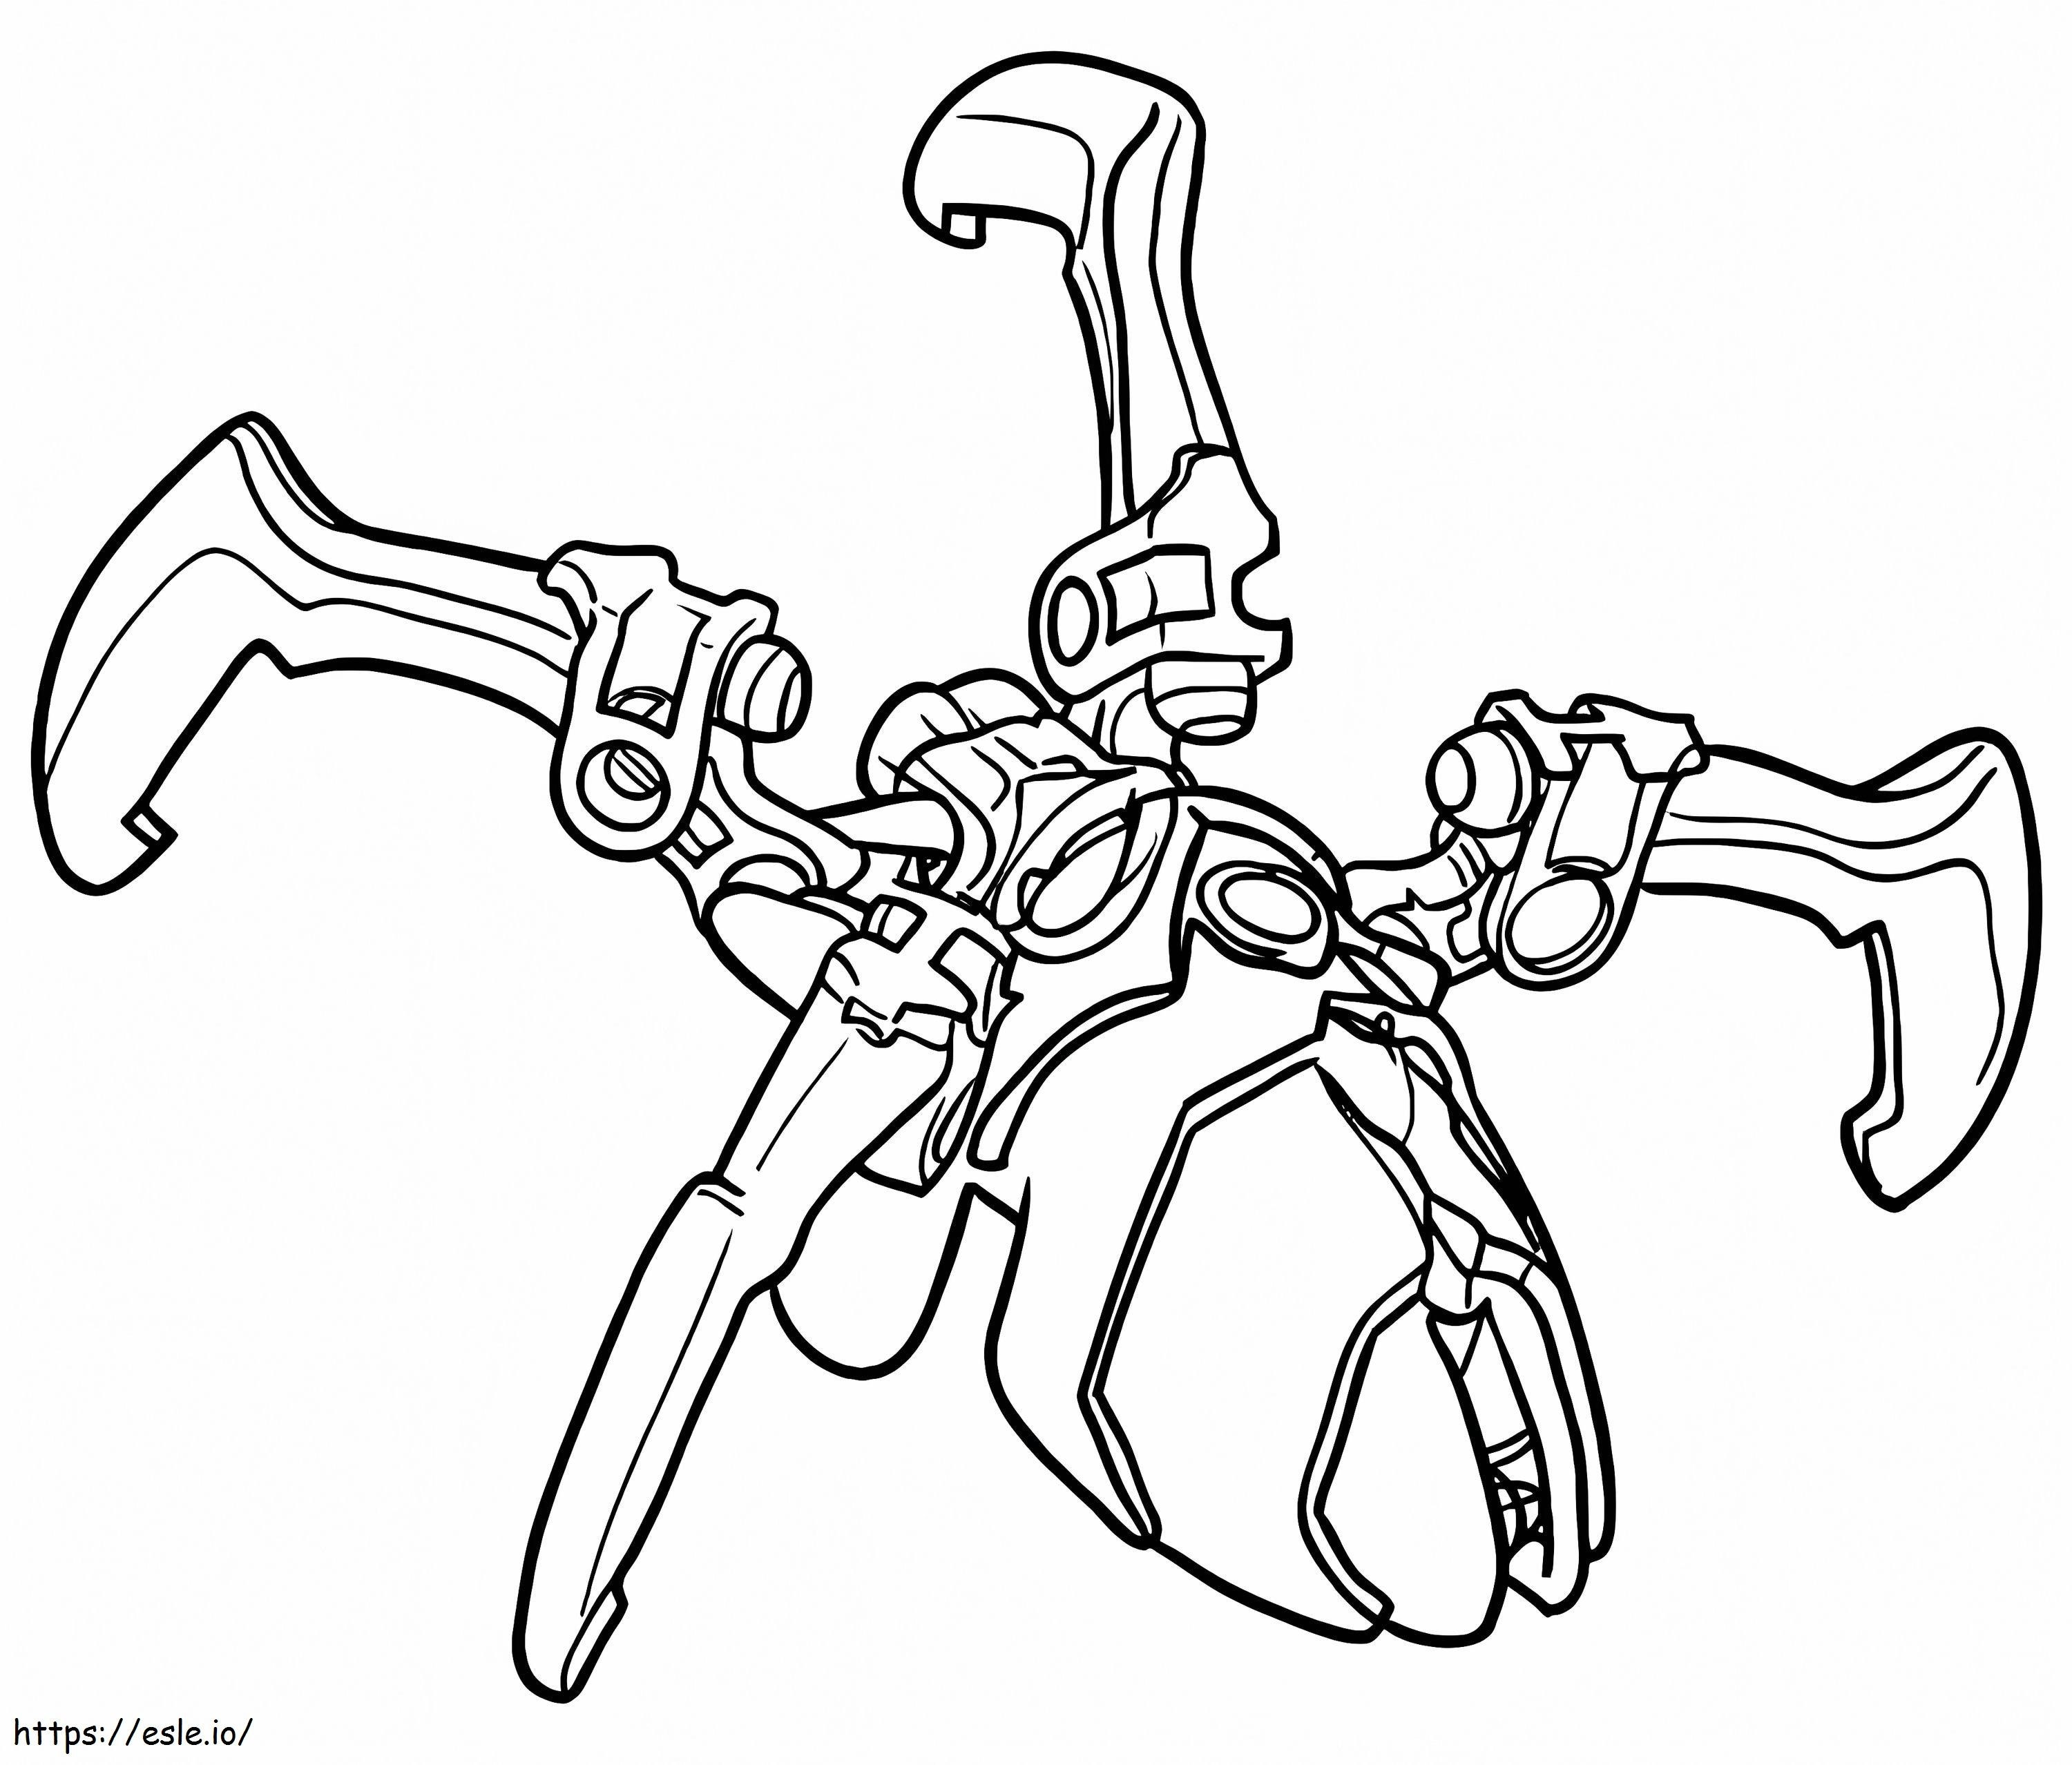 Skull Spider Bionicle coloring page